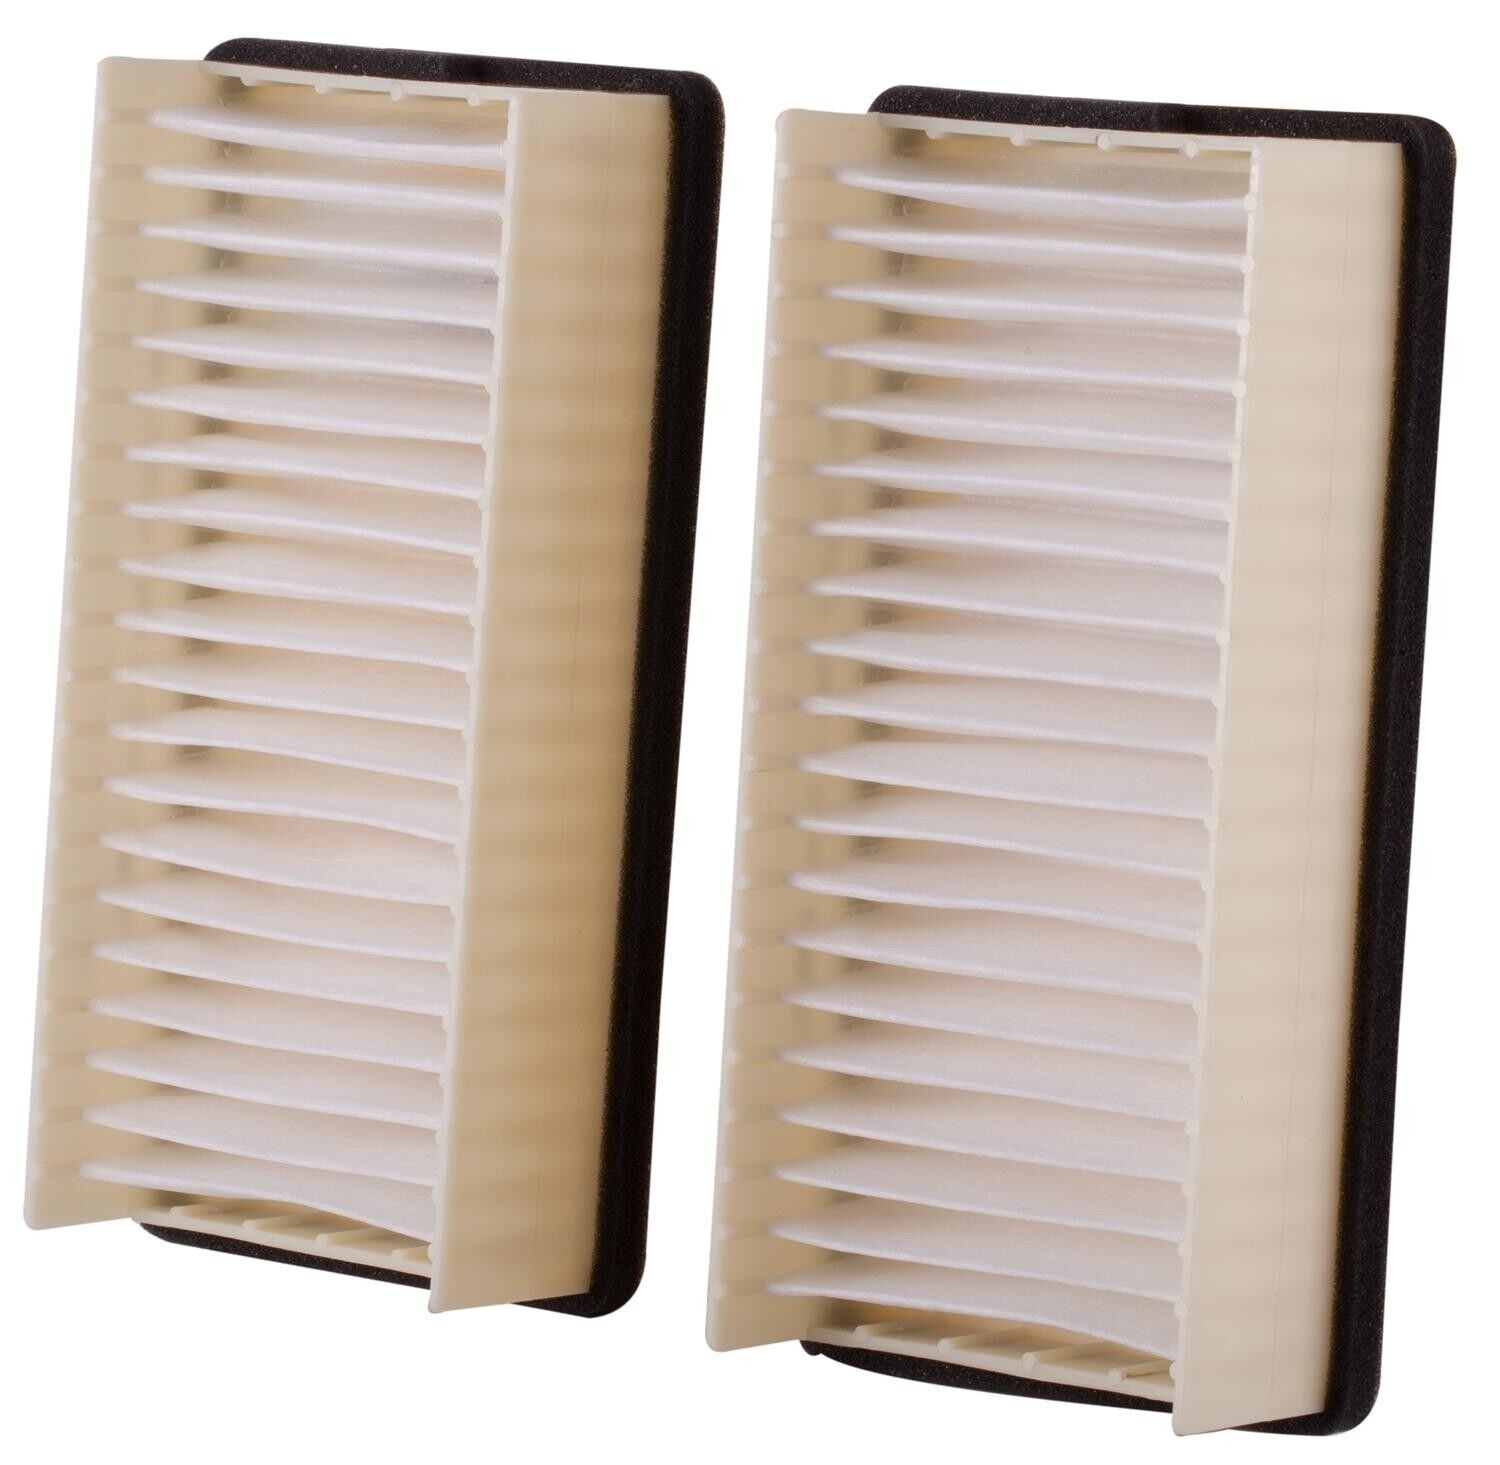 Pronto Cabin Air Filter for Venture, Silhouette, Montana, Trans Sport PC5246